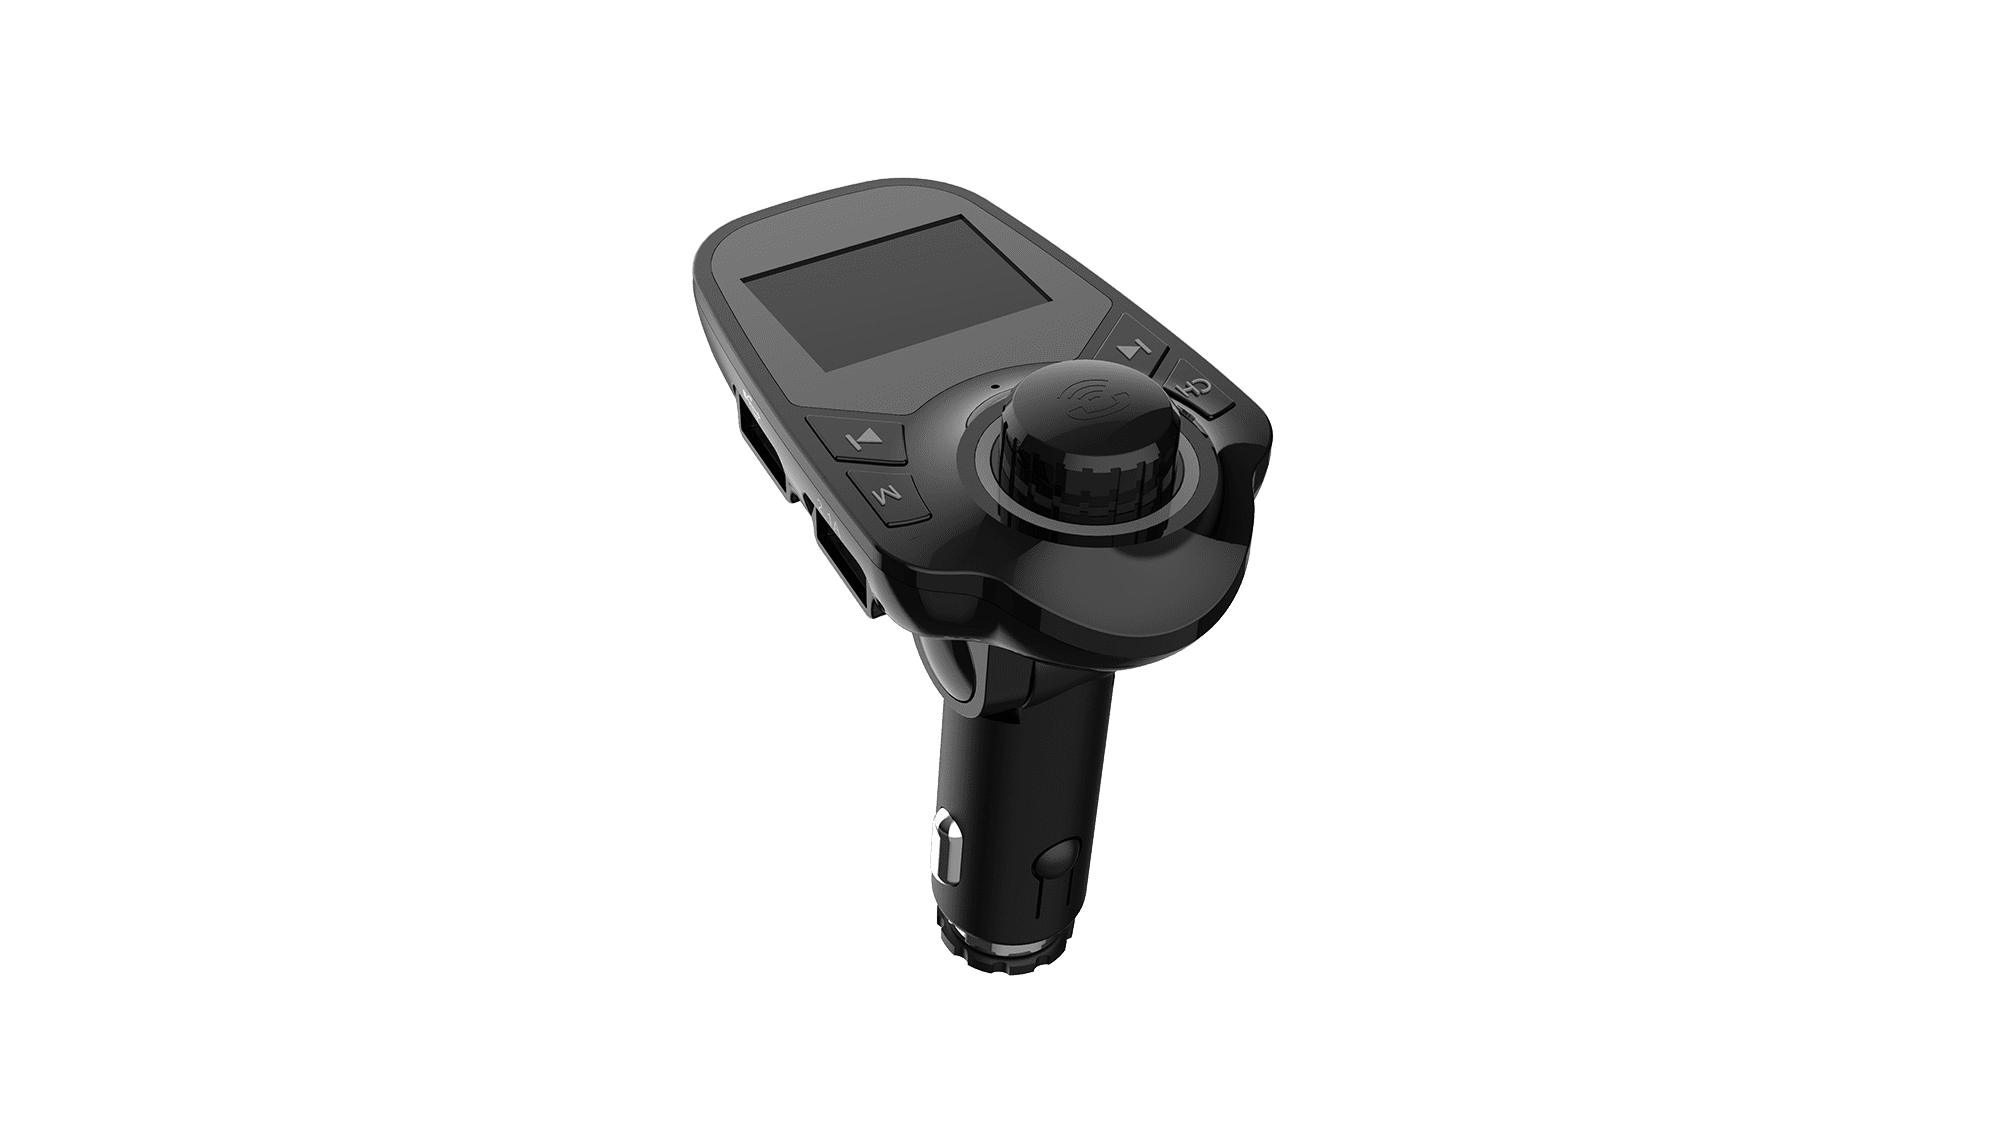 Auto Drive Low Profile Bluetooth FM Transmitter, Enable Hands-Free Phone  Calls,Compatible with Smartphones